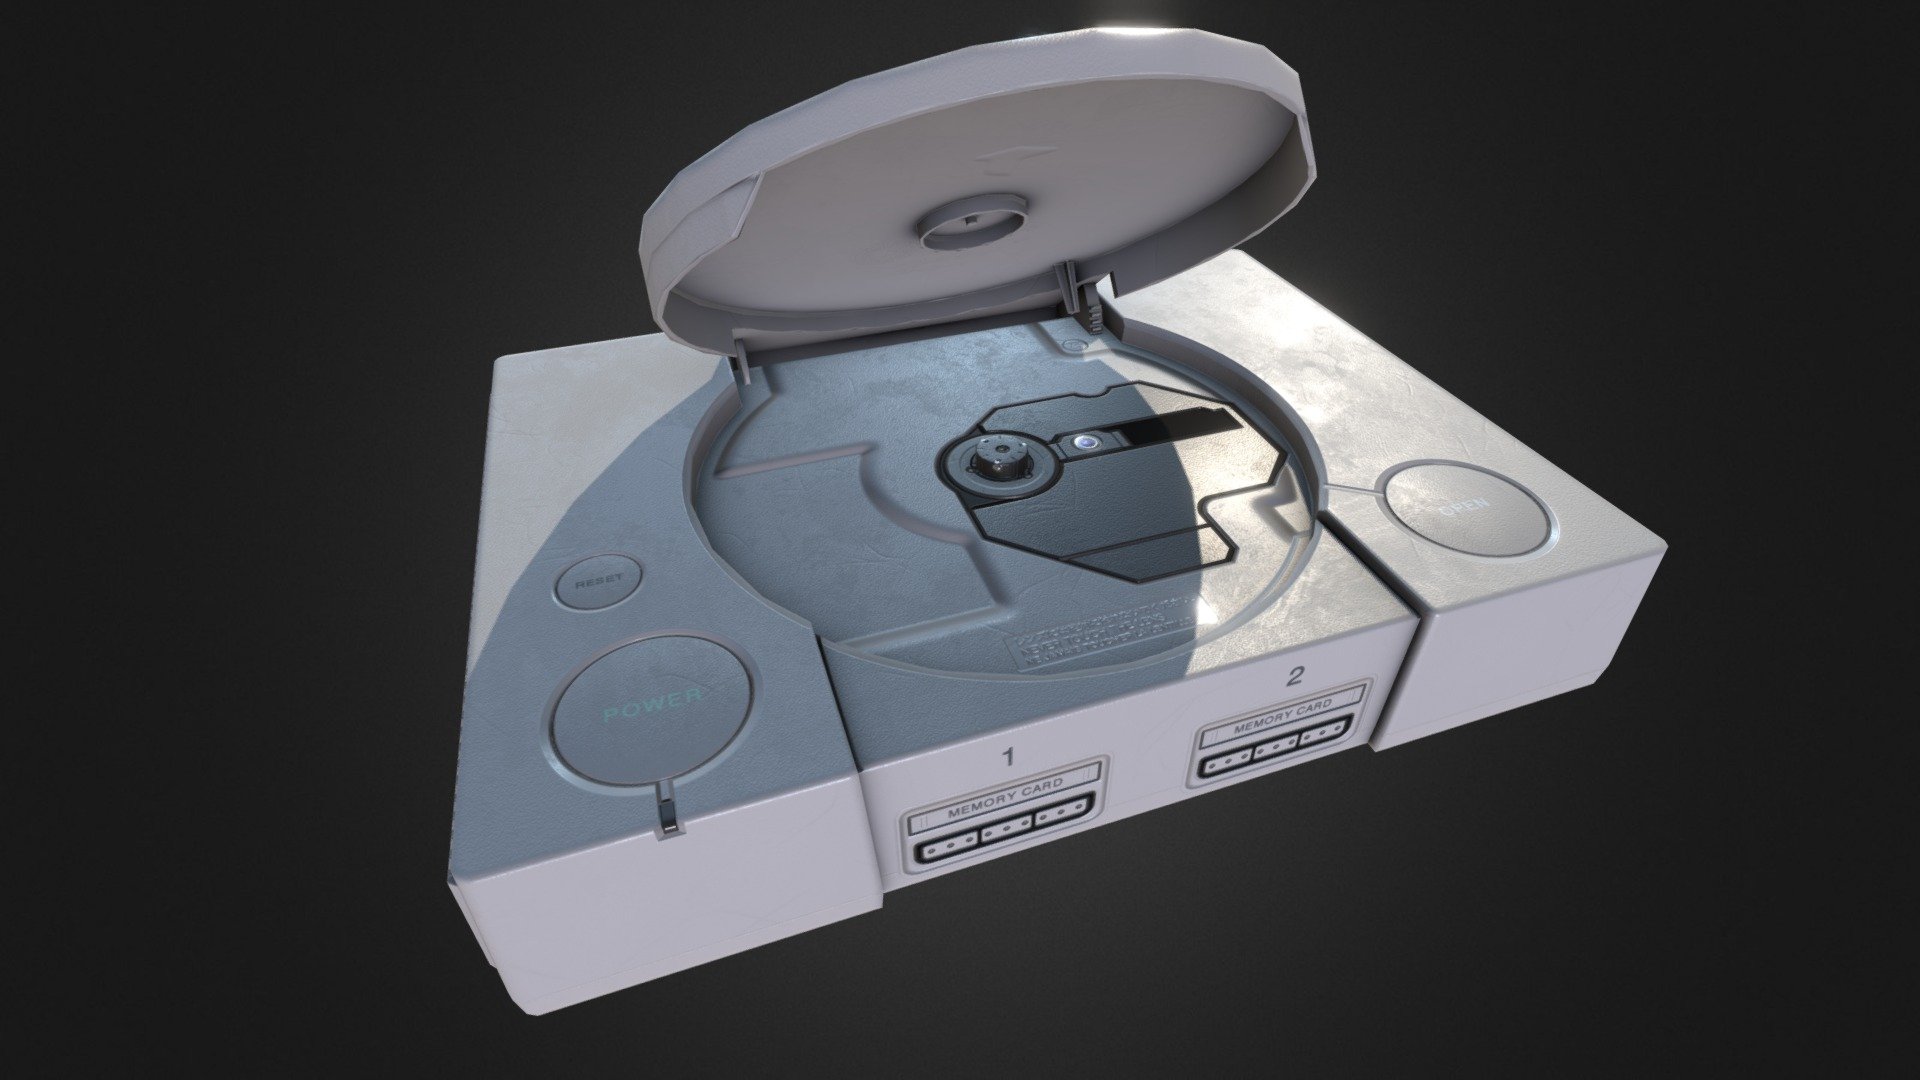 Low poly PlayStation console for EmuVR.

Check the closed tray version: https://skfb.ly/DHto

Play oldschool video games in Virtual Reality:

http://www.emuvr.net

https://www.youtube.com/watch?v=SLETH8dO9r8 - PlayStation (open tray) - 3D model by NeoZeroo 3d model